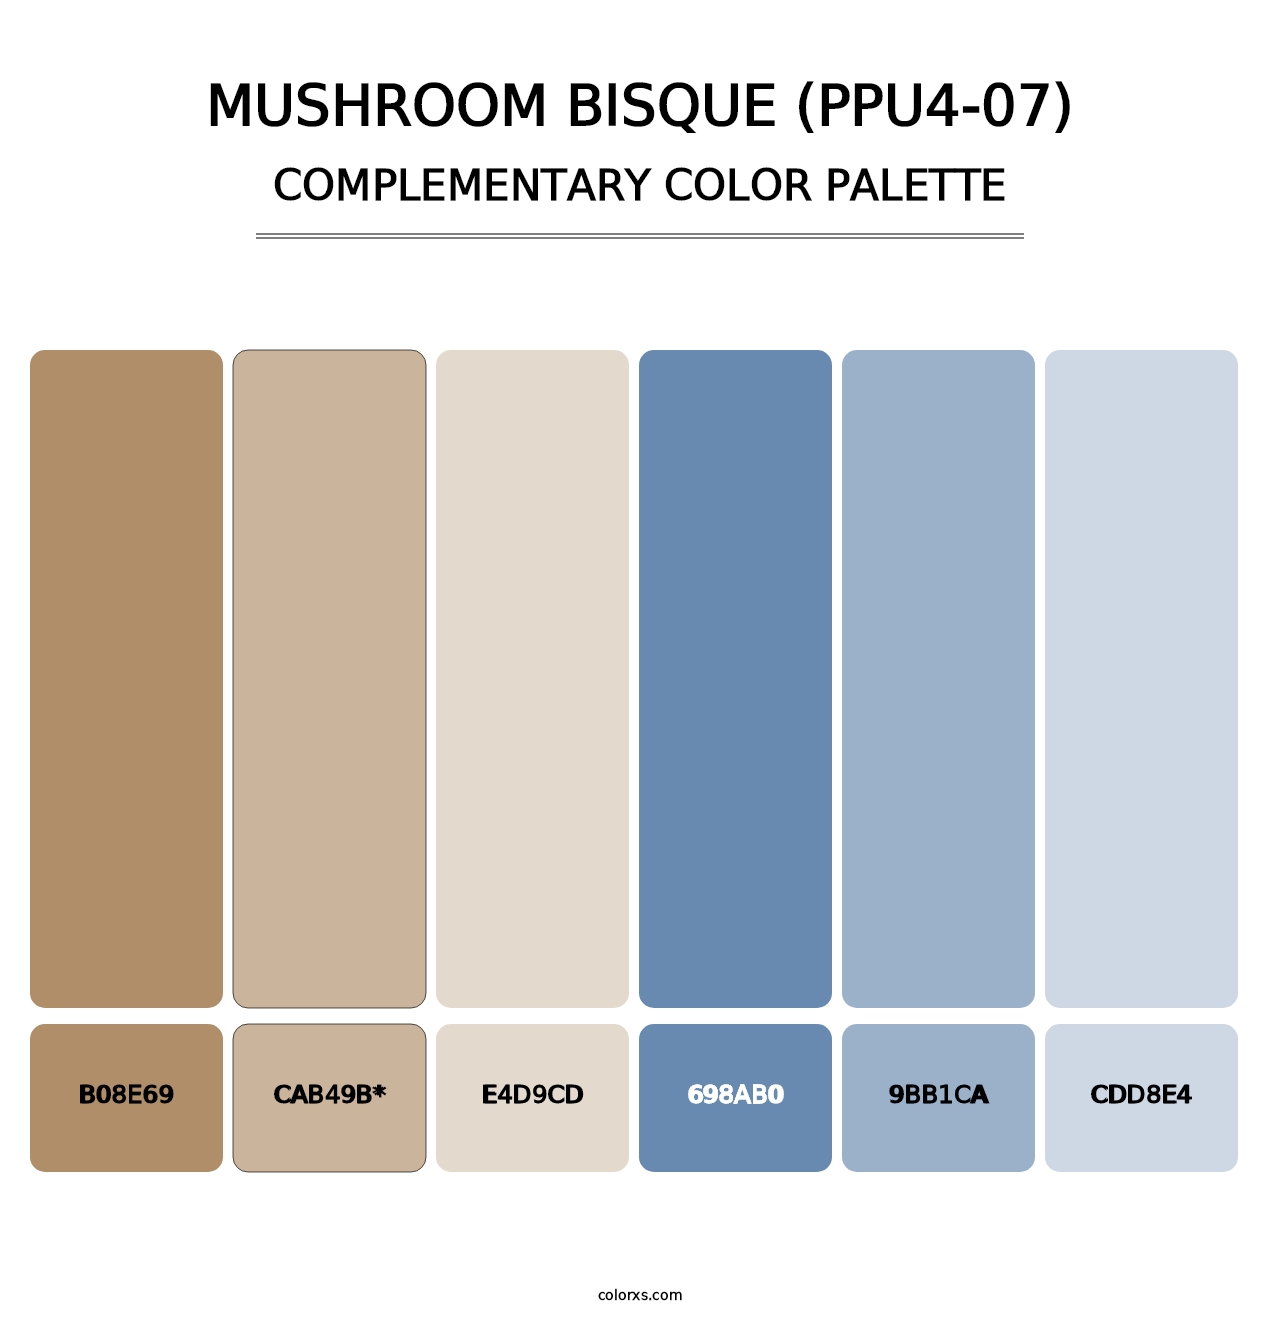 Mushroom Bisque (PPU4-07) - Complementary Color Palette